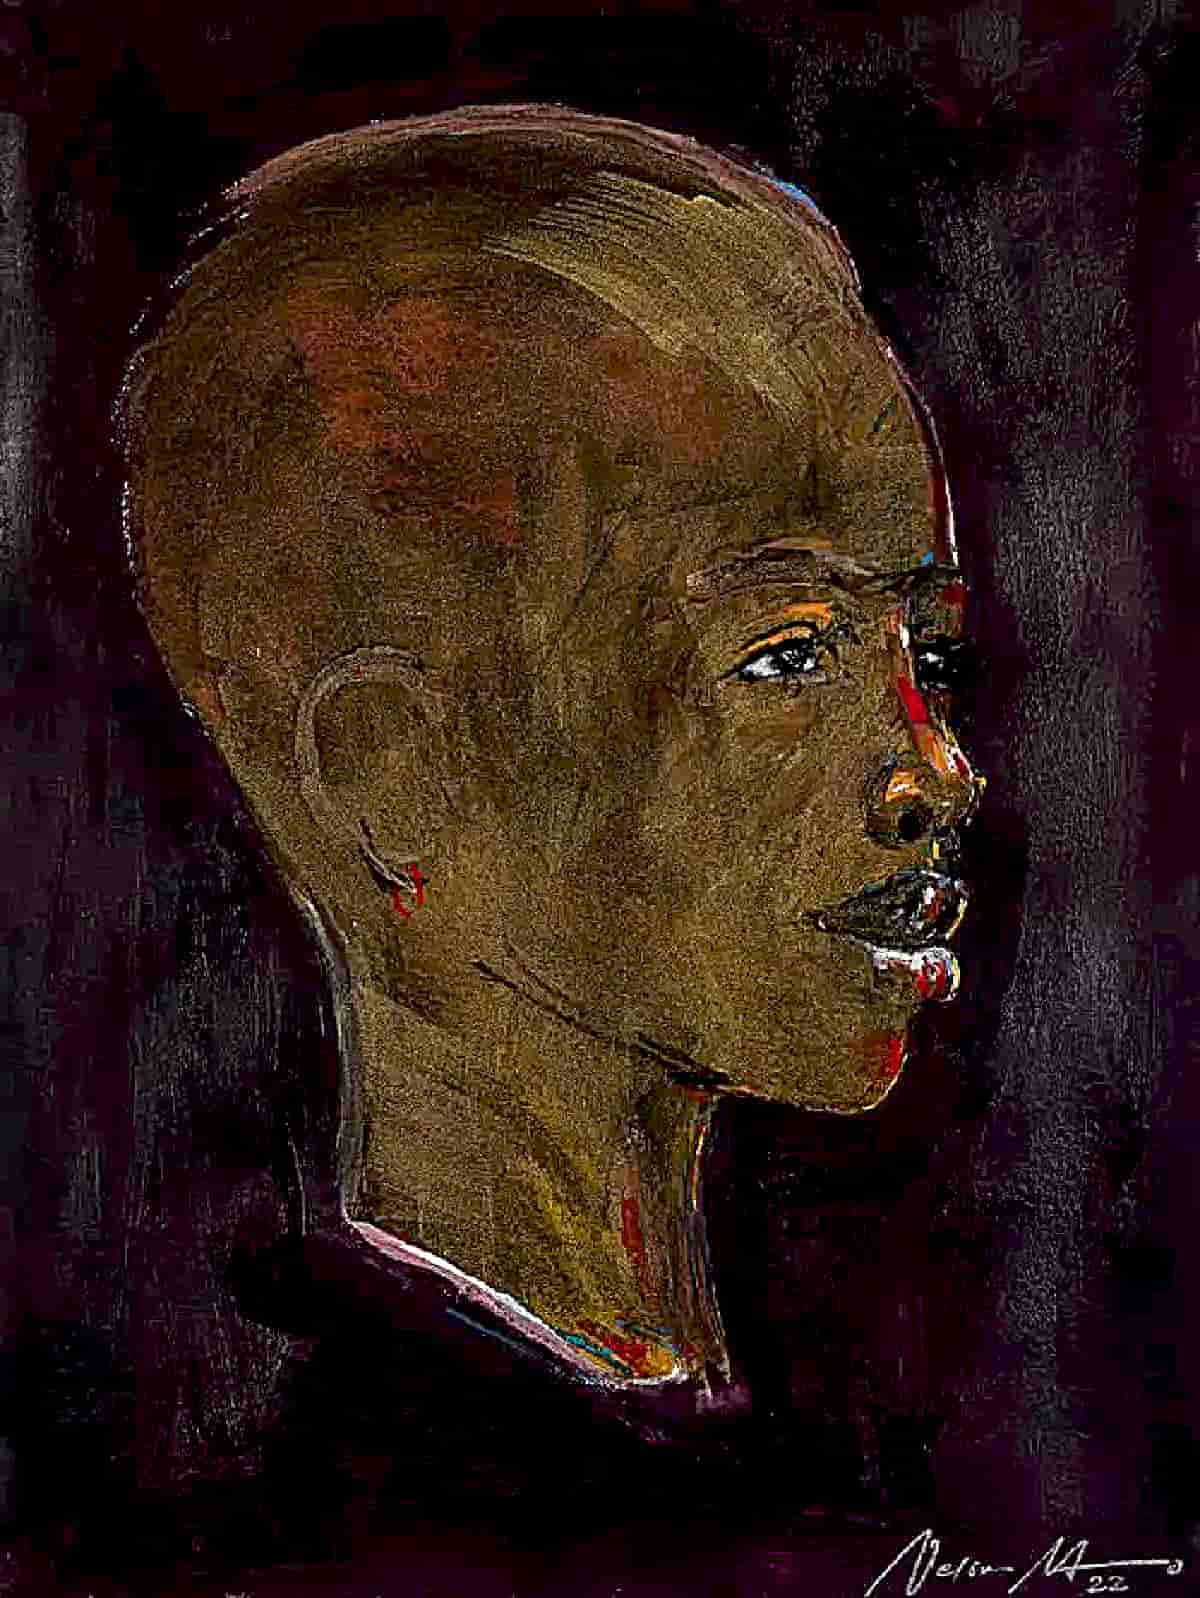 Energetic markings in charcoal delineate Nelson Makamo’s charismatic rendered in lively, gestural lines of charcoal candid portraits of childhood joy